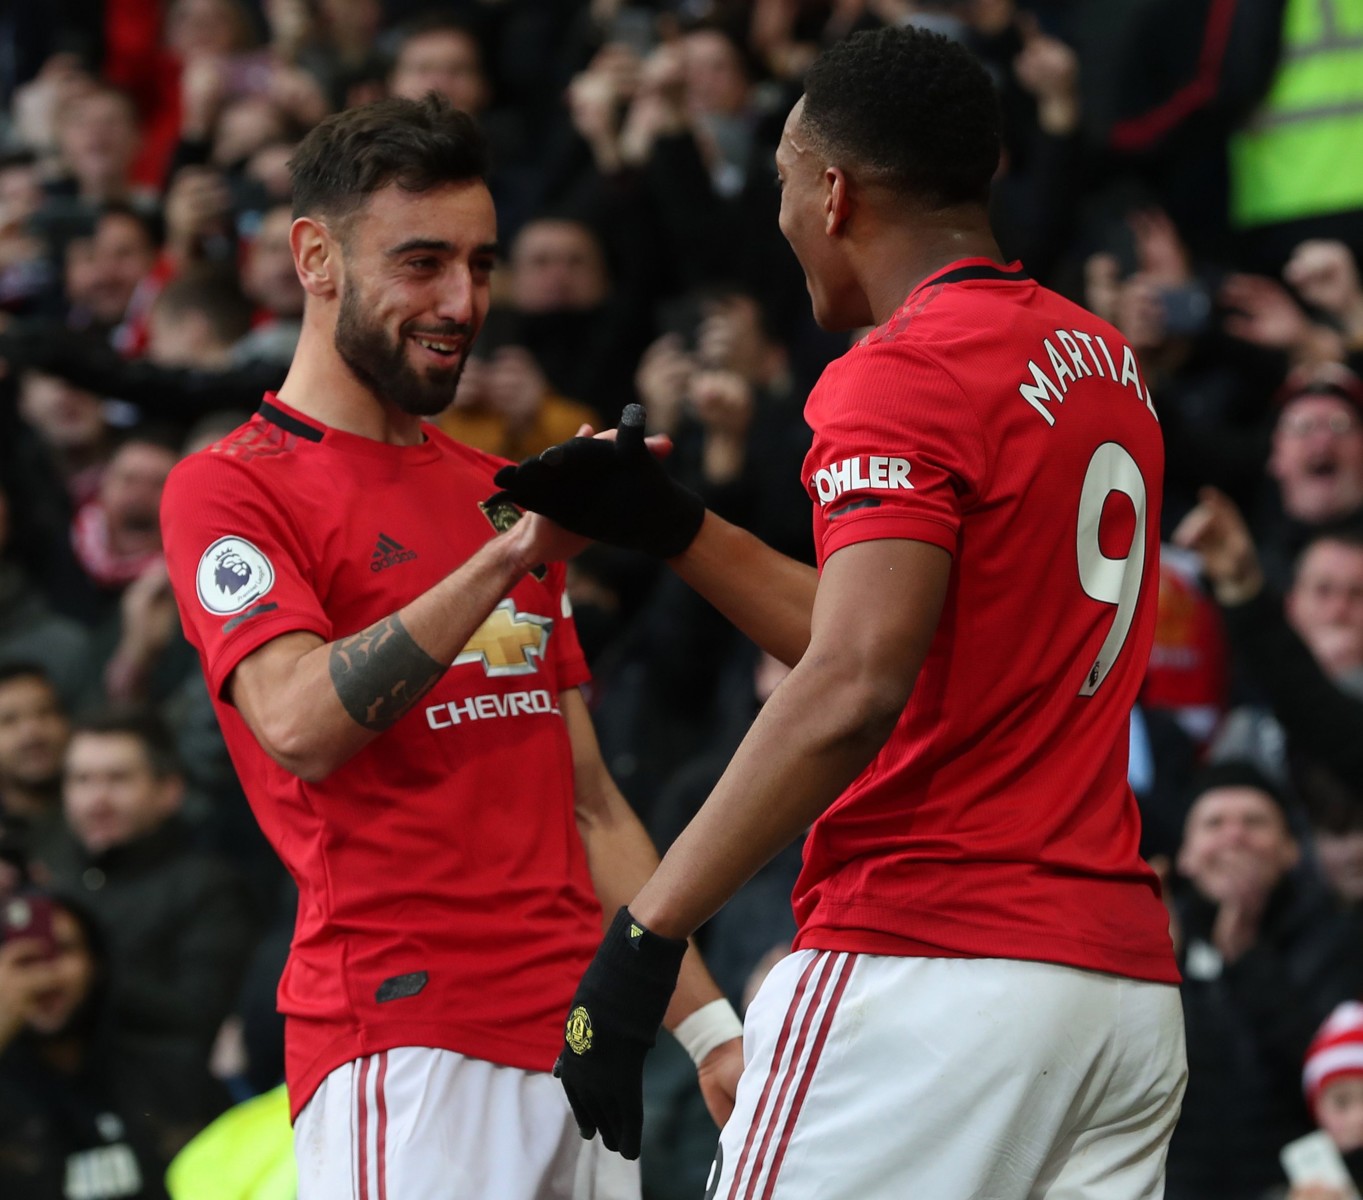 Man Utd ace Bruno Fernandes hails Anthony Martial after brilliantly teeing up the Frenchman for the opener in Sunday's 2-0 win over neighbours City